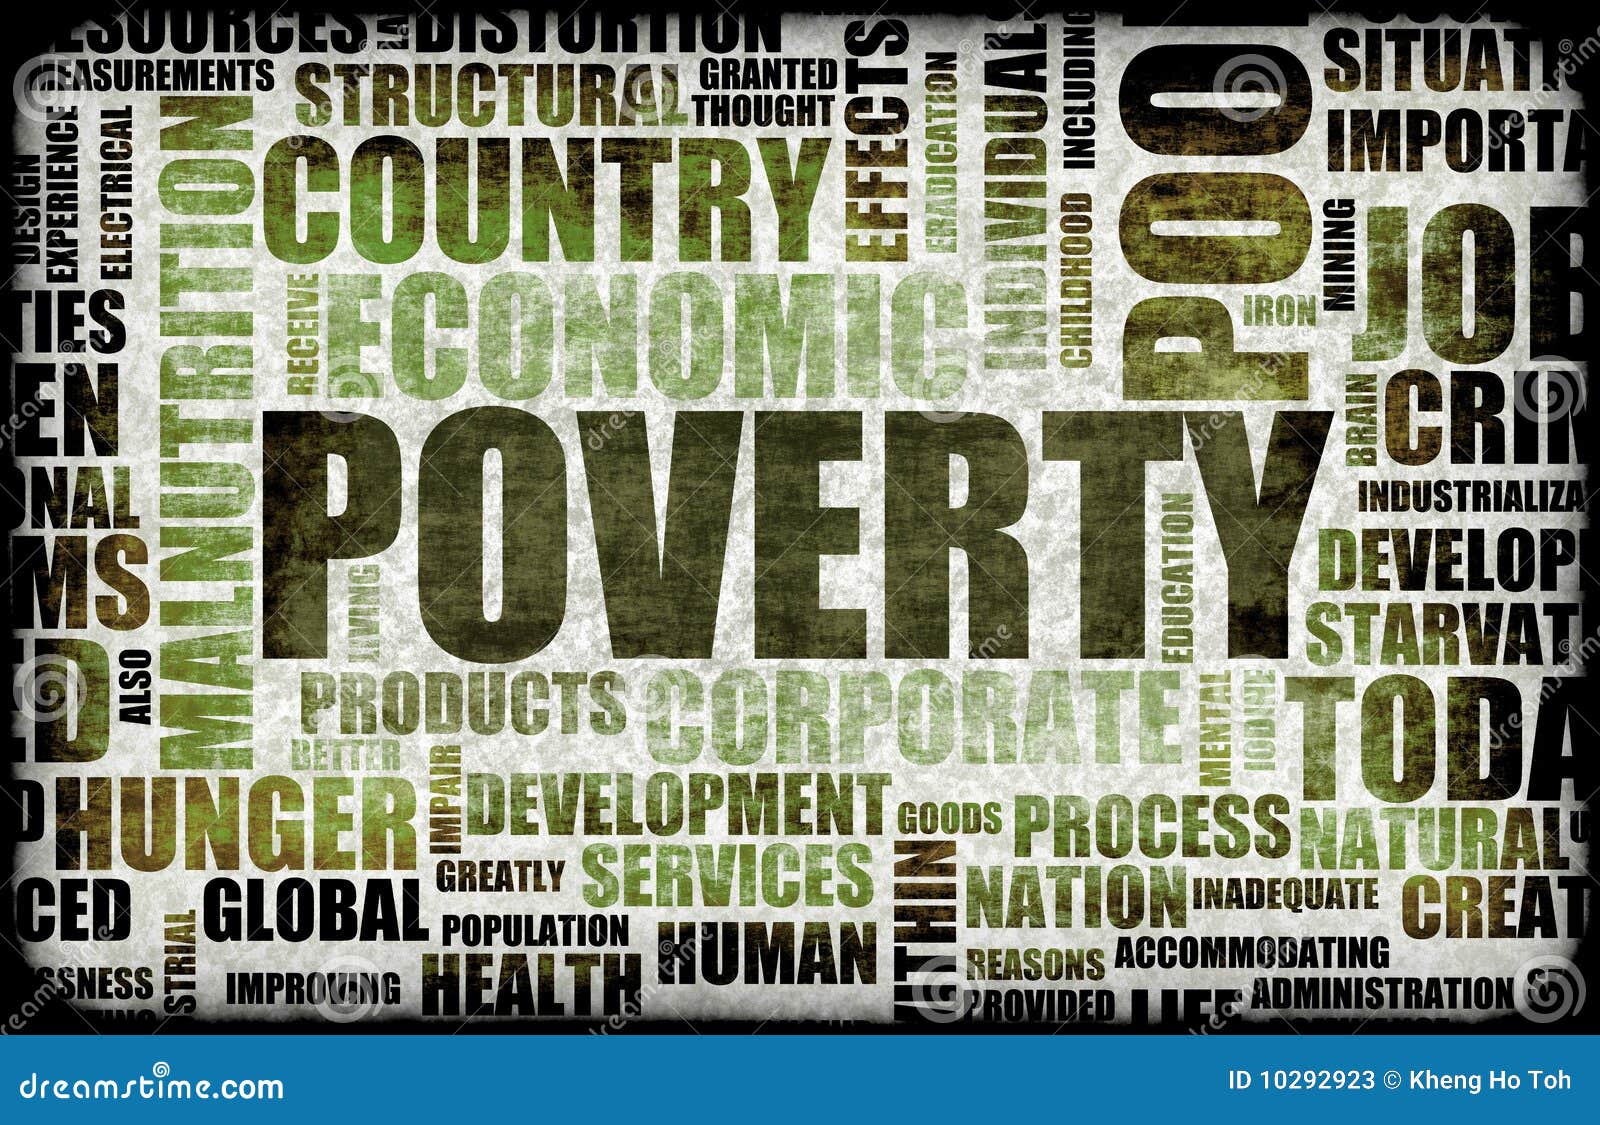 clipart on poverty - photo #20